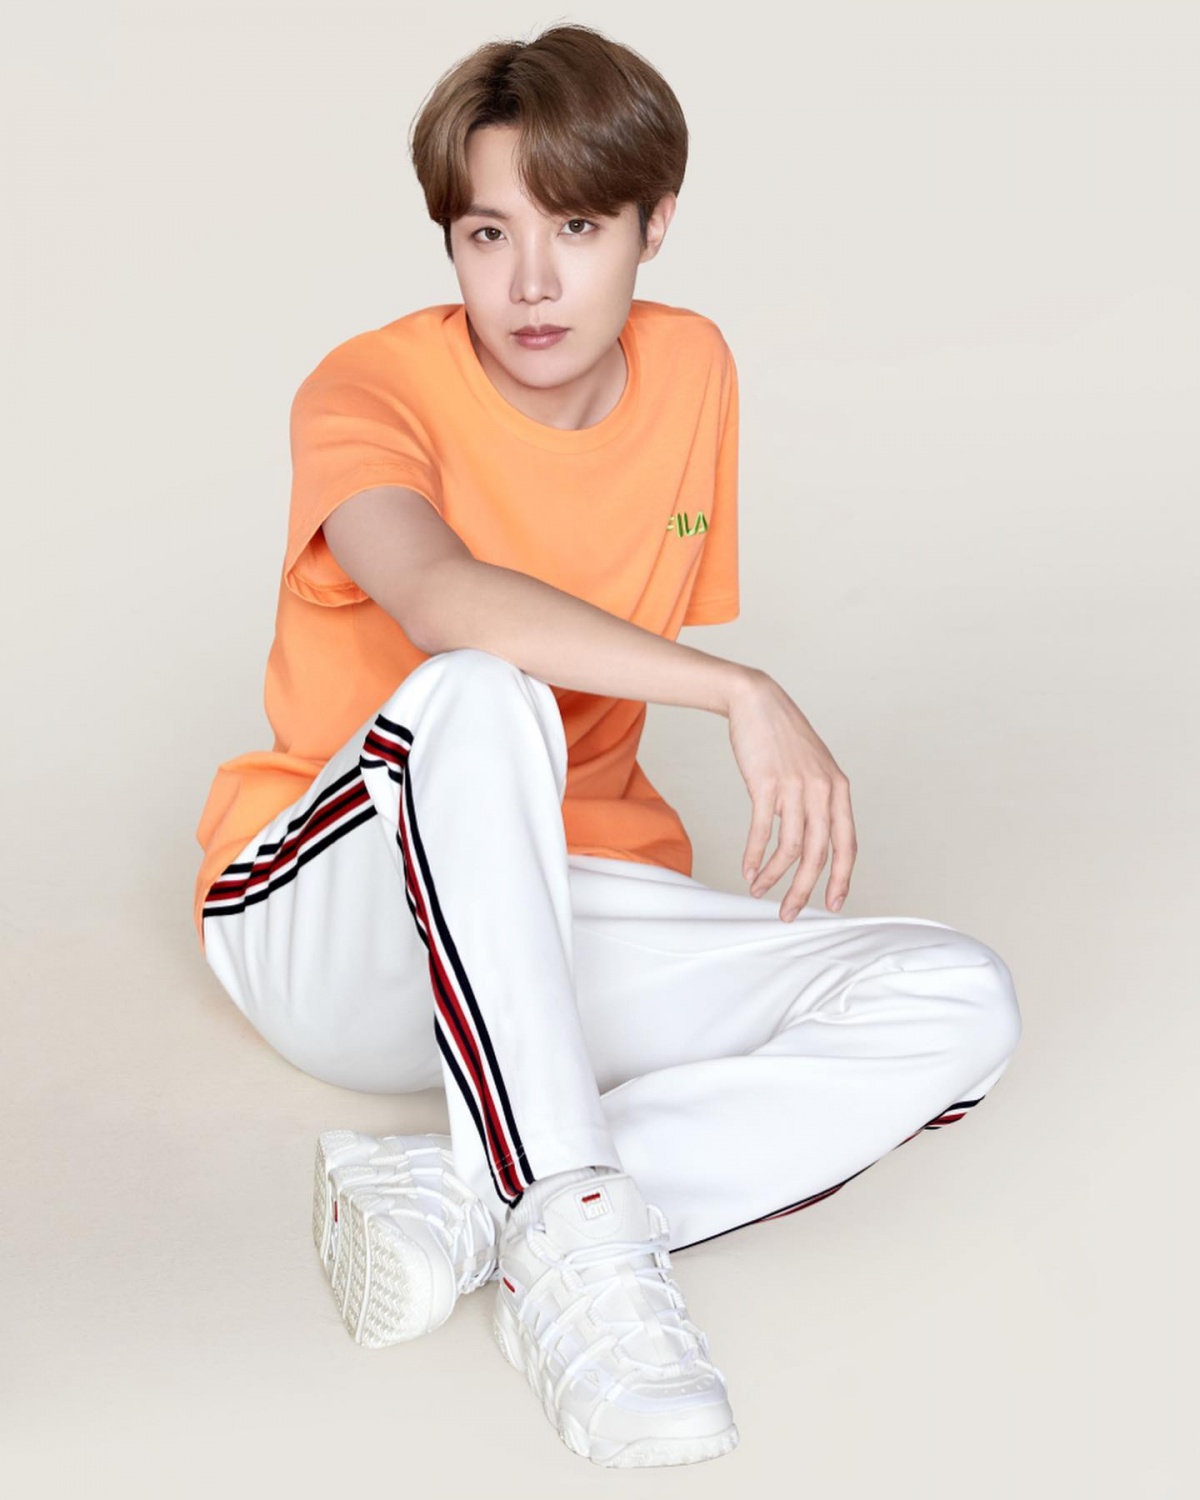 FILA Japan Unveils BTS's Individual Shots For Summer Collection